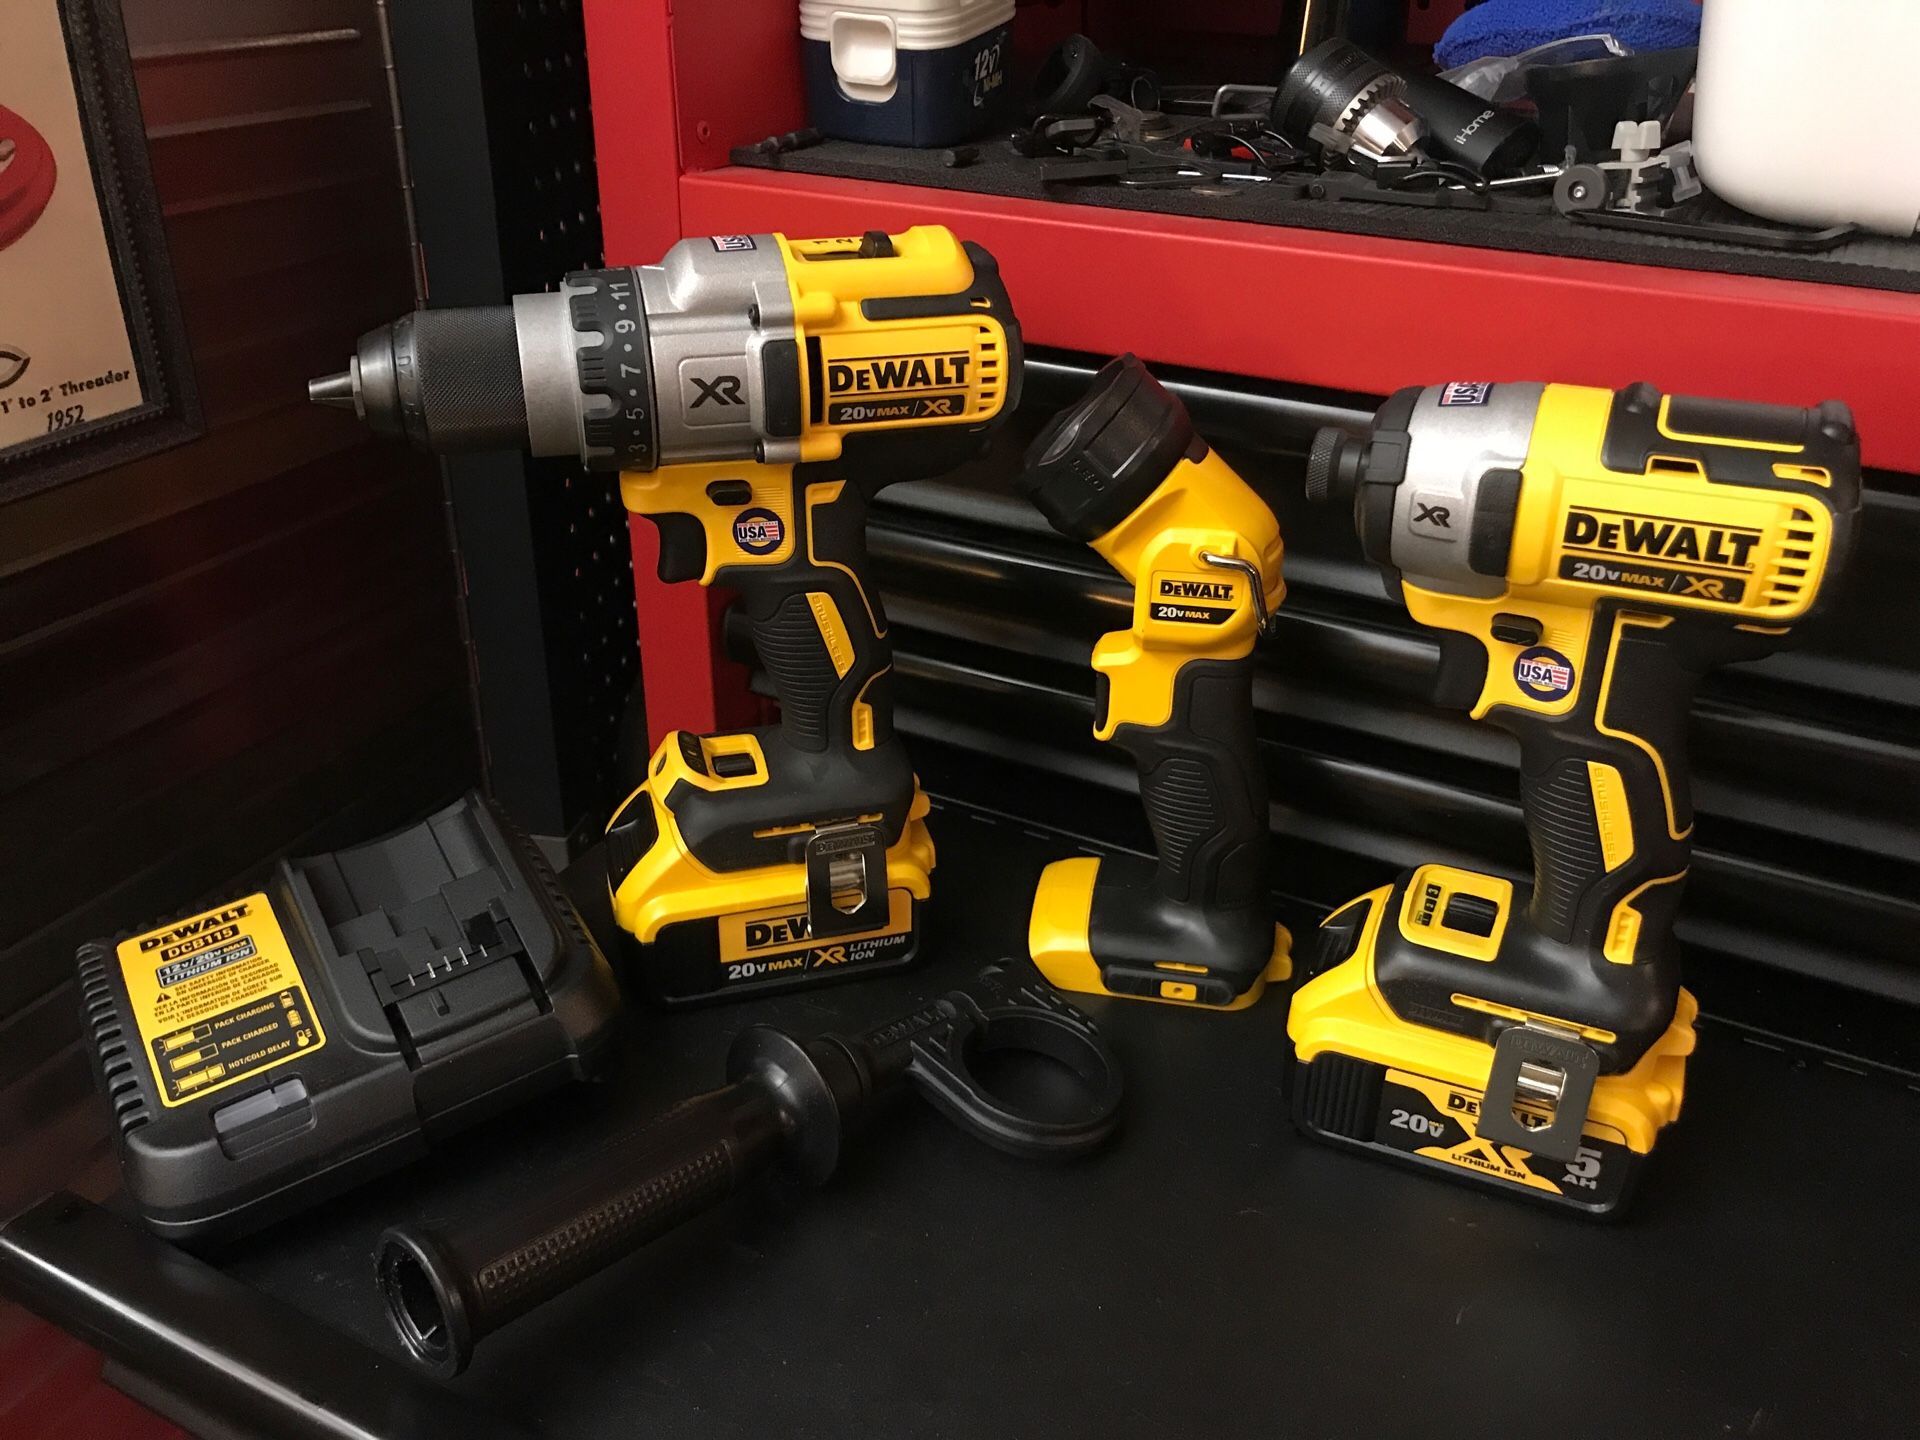 DEWALT XR BRUSHLESS 3 TOOL CUSTOM KIT W 3 SPEED HAMMER DRILL, 1/4 inch IMPACT DRIVER, and 20V FLASHLIGHT INCLUDING 4.0/5.0/CHARGER BRAND NEW